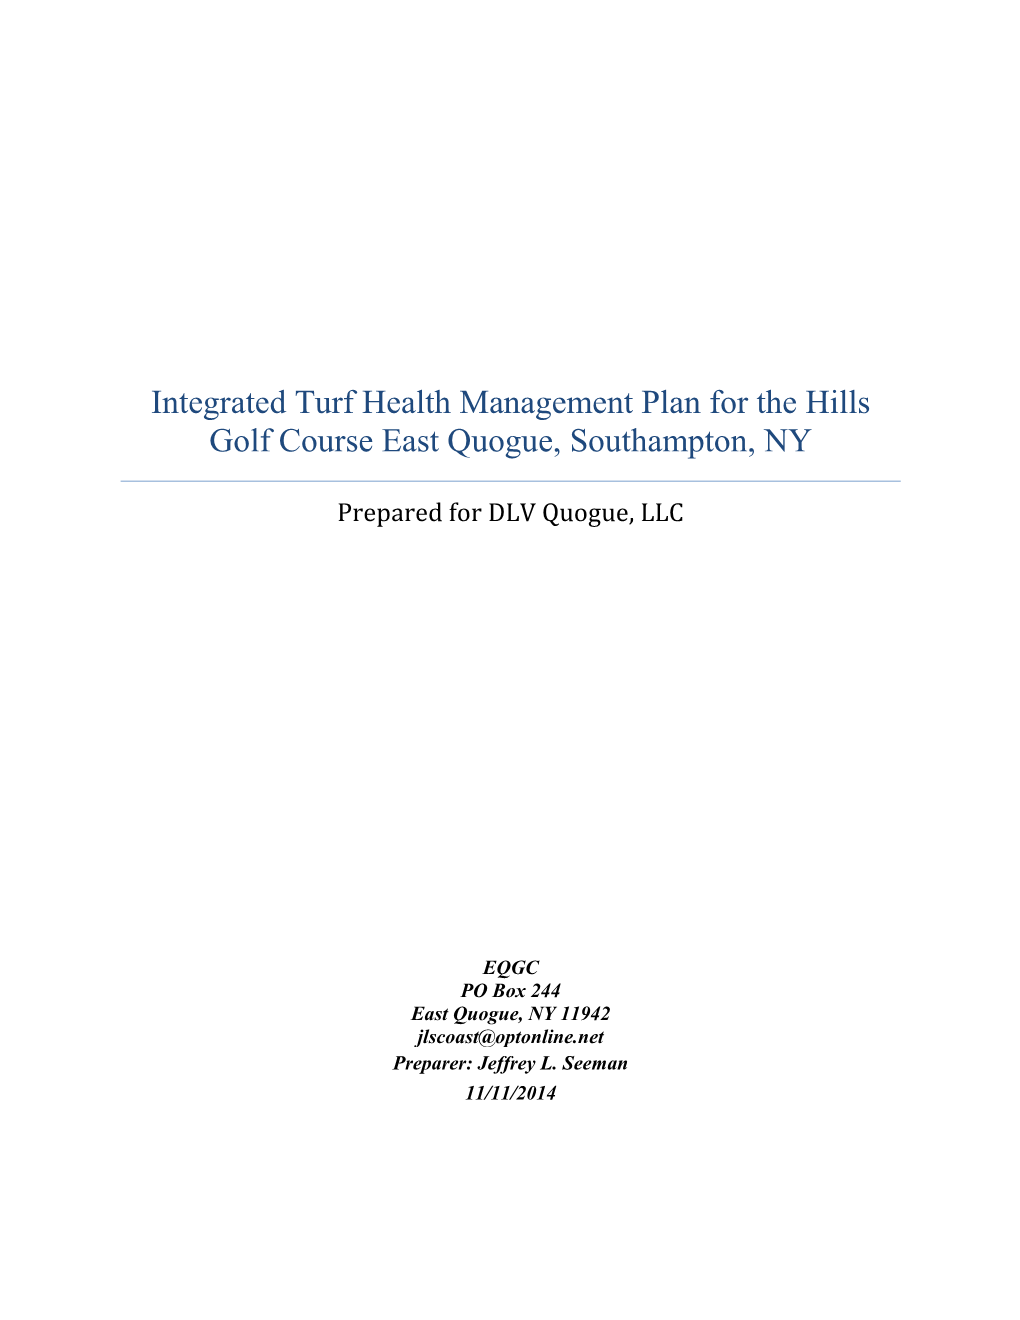 Integrated Turf Health Management Plan for the Hills Golf Course East Quogue, Southampton, NY